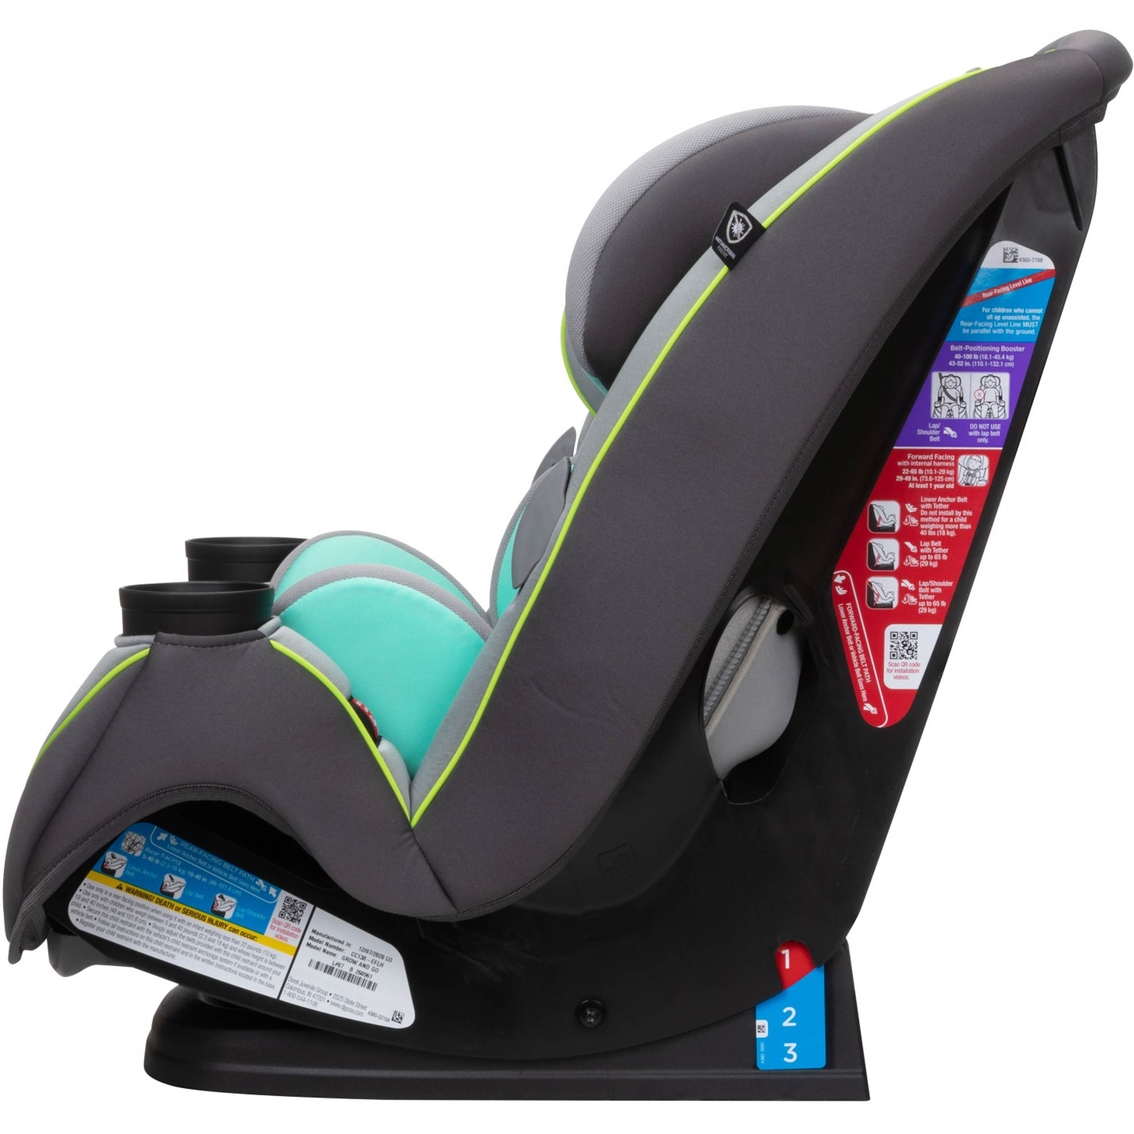 Safety 1st Grow and Go All in One Convertible Car Seat - Image 8 of 9